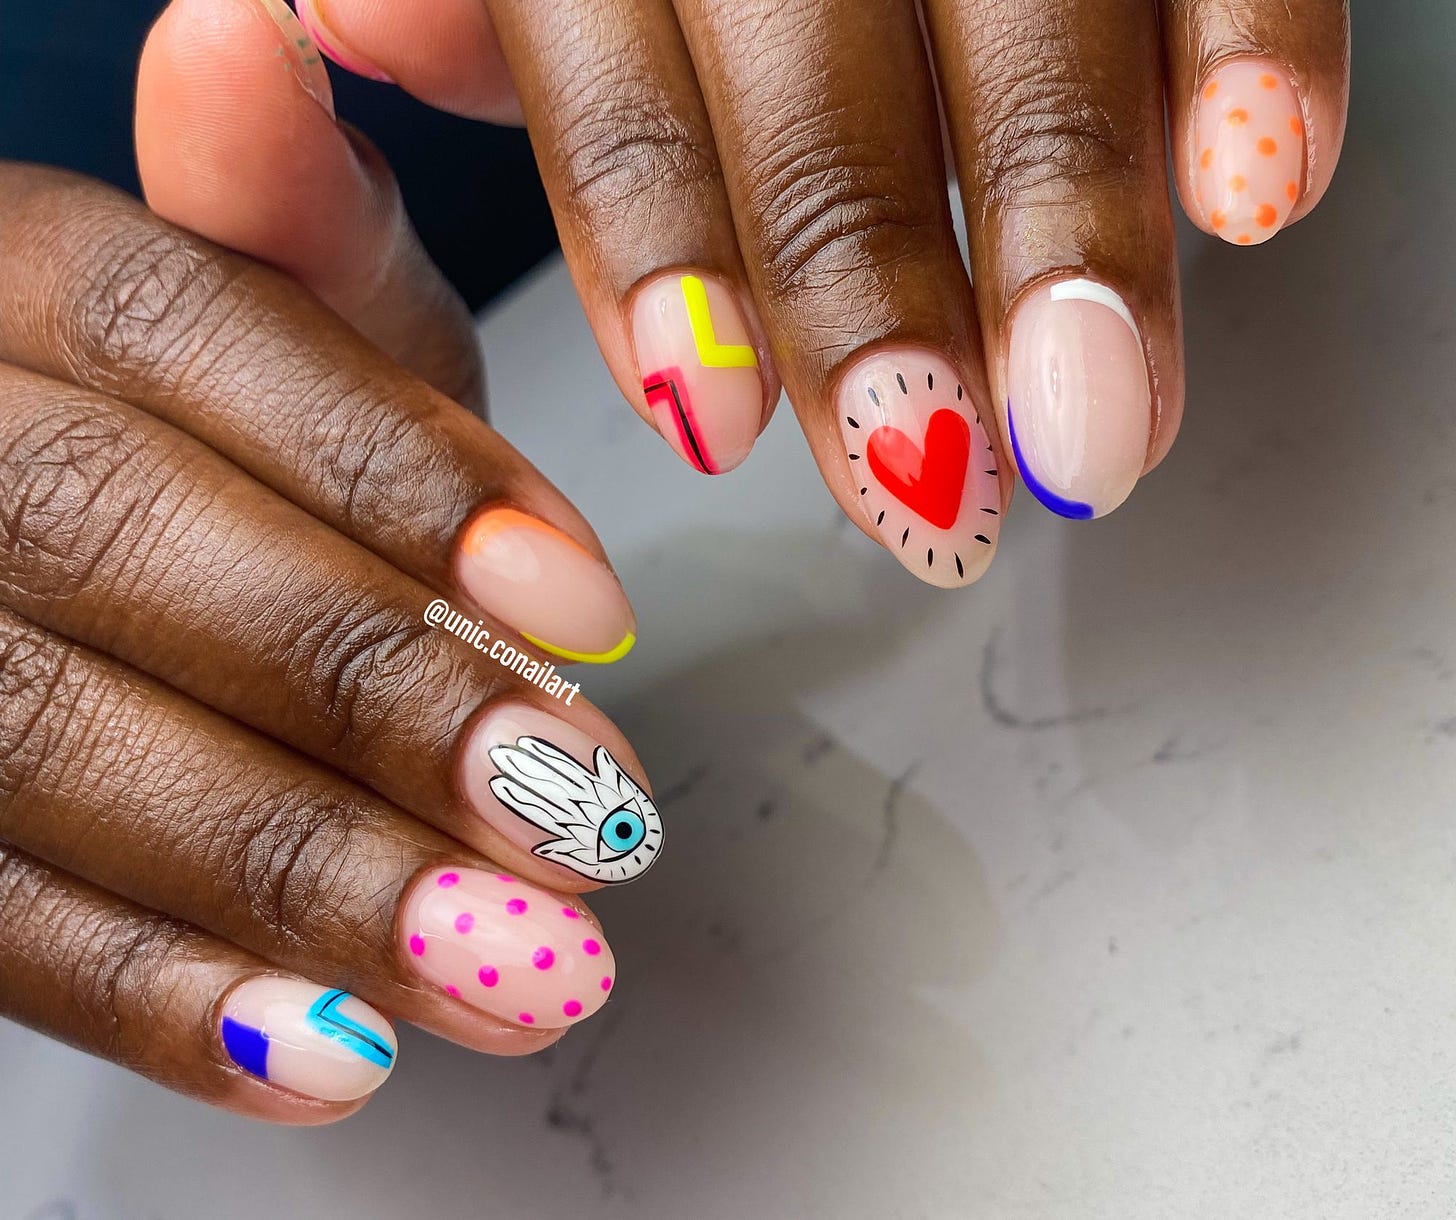 5 of Houston's best nail salons/techs according to our followers